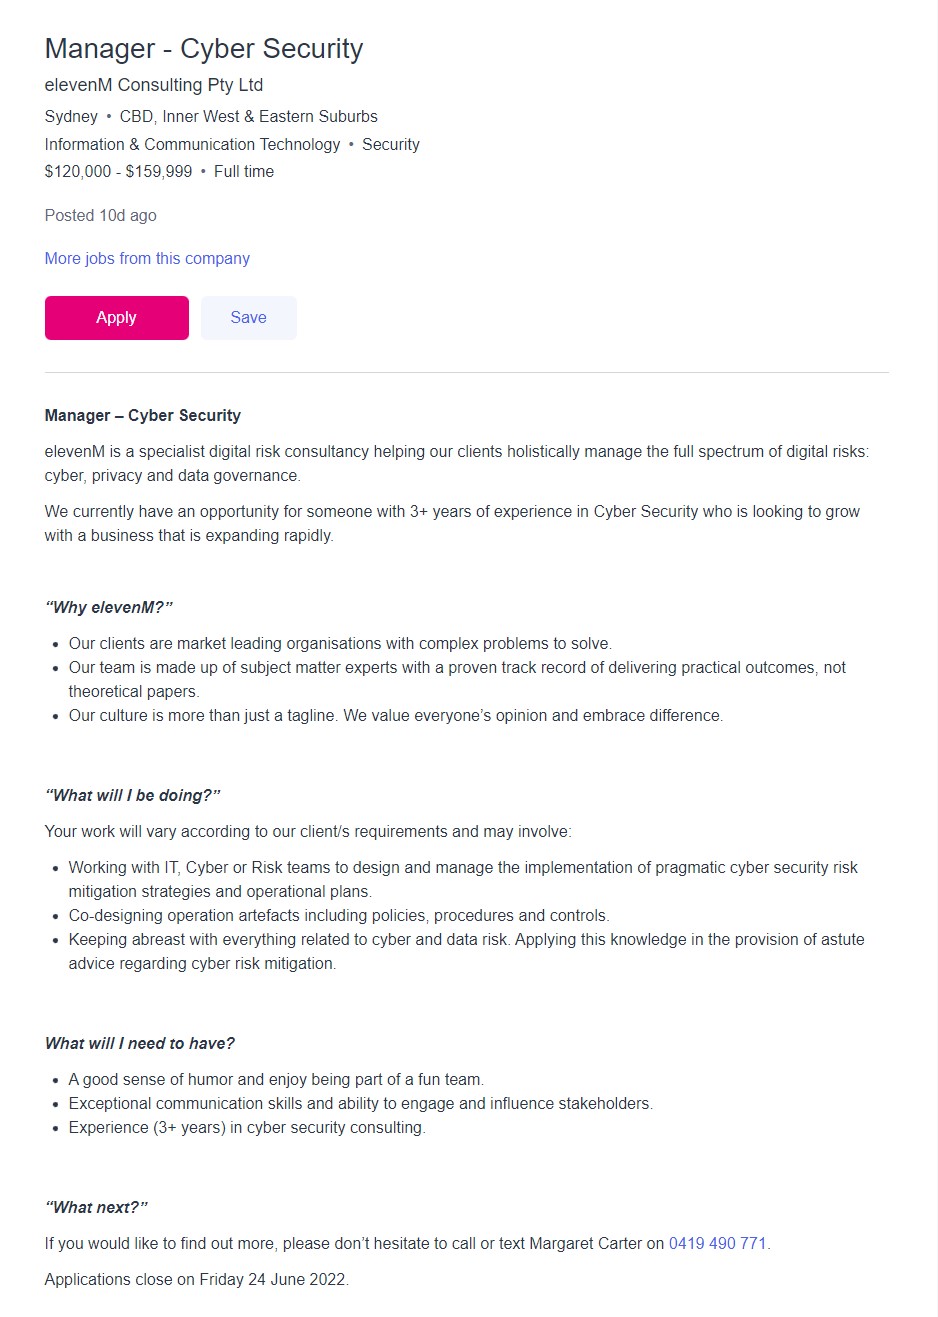 Photo of Cybersecurity job listing from Seek